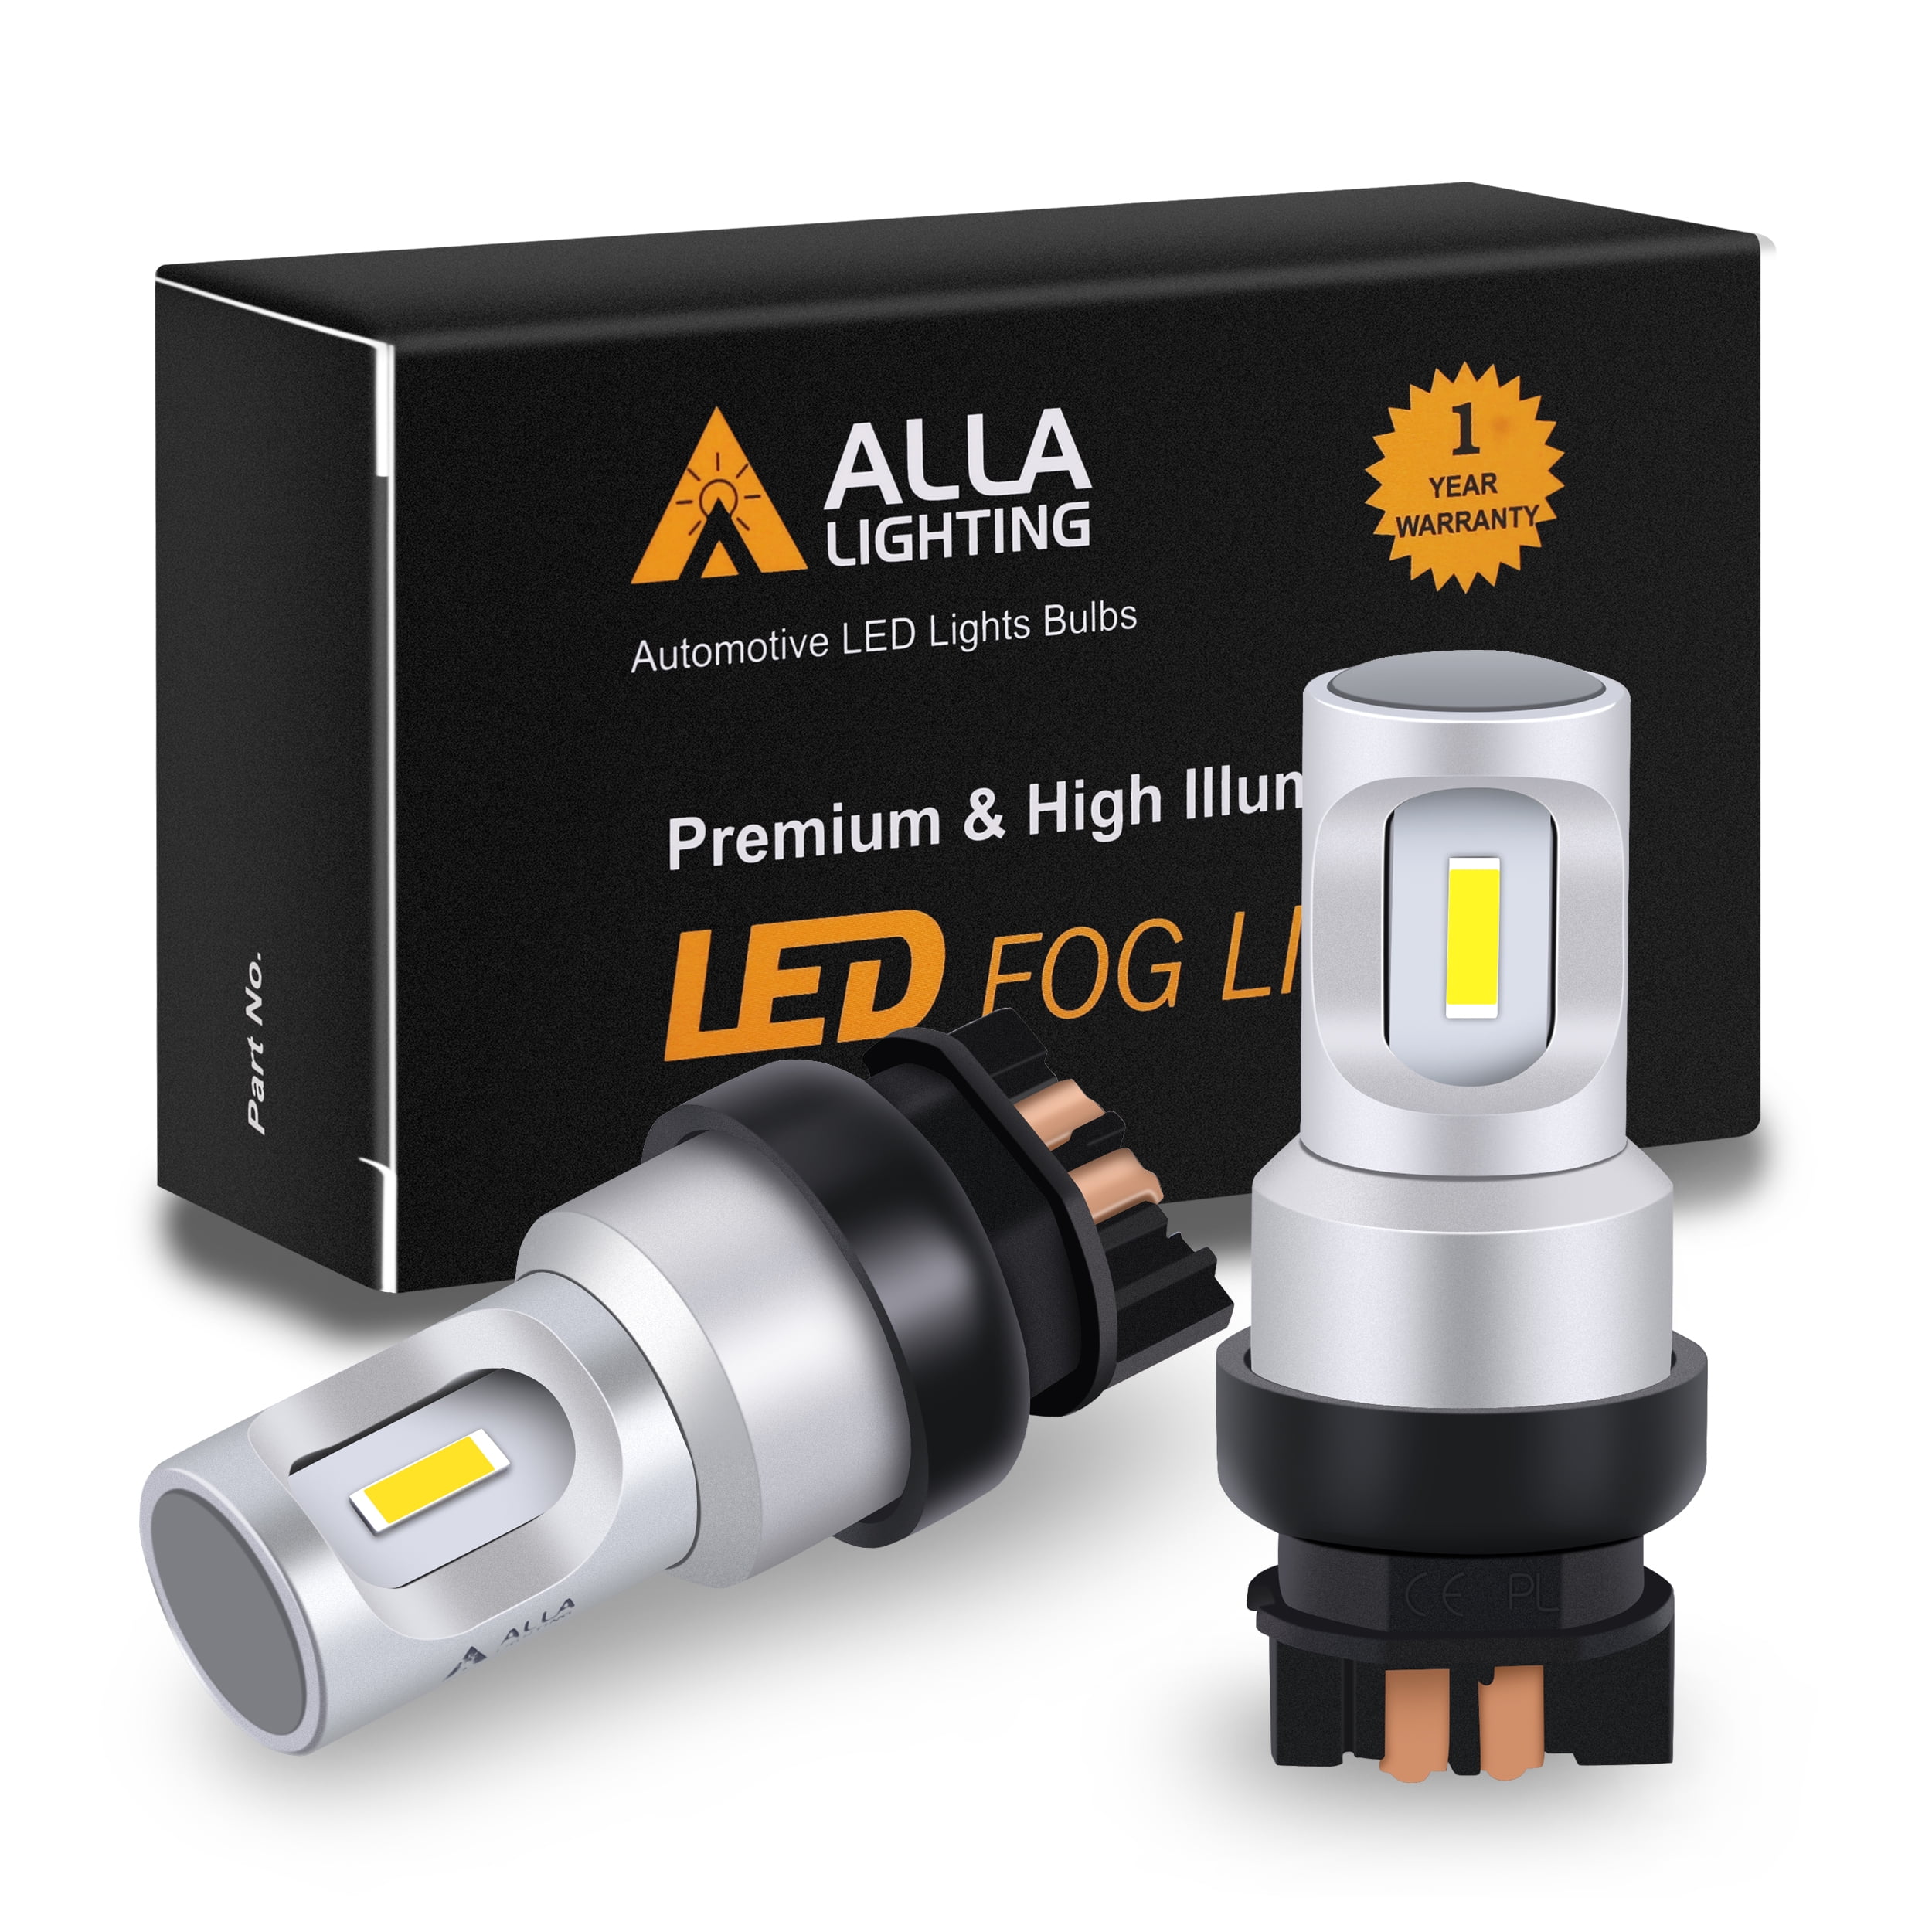 Alla Lighting 12272na HPC24WY PH24WY LED Turn Signal Lights Bulbs, Yellow Replacement for Audi, Cadillac, GMC, Porsche, Size: 12272NA/PH24WY